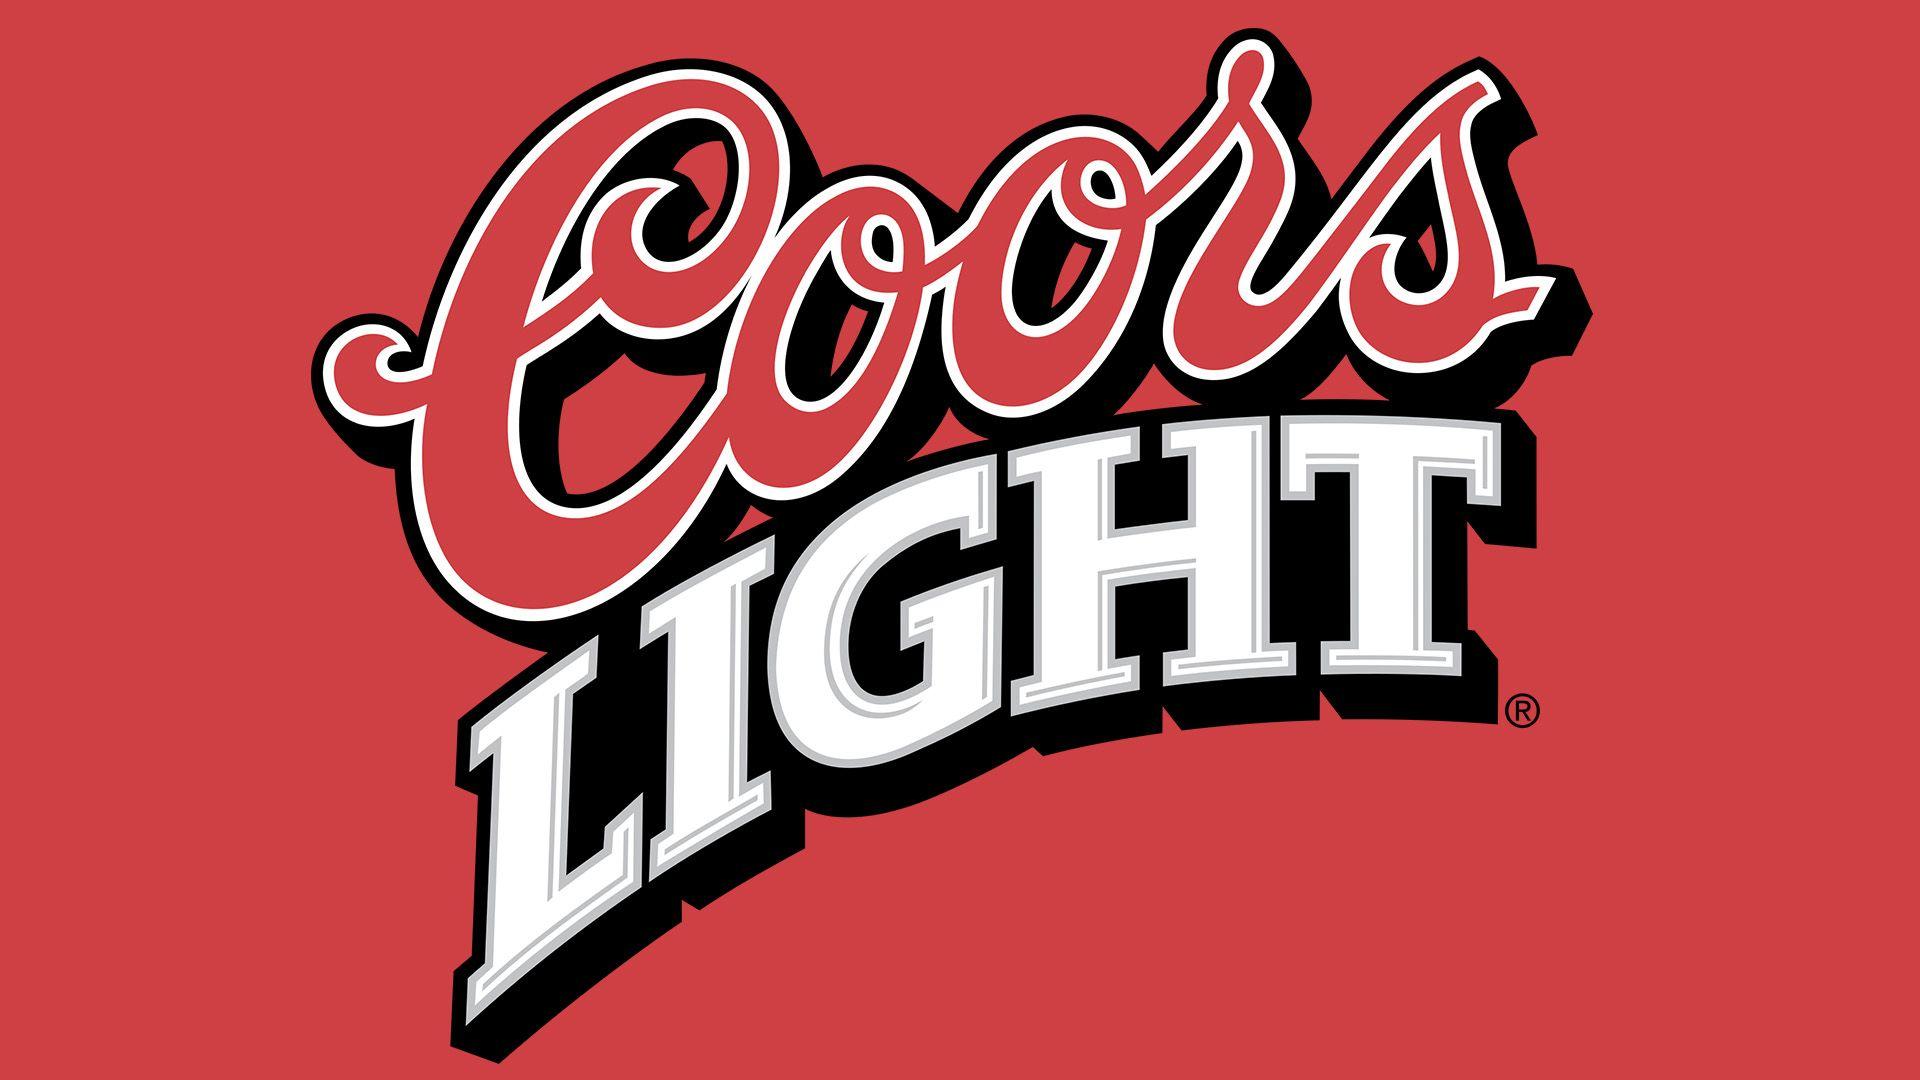 Old Coors Light Logo - Coors Light logo, symbol, meaning, History and Evolution